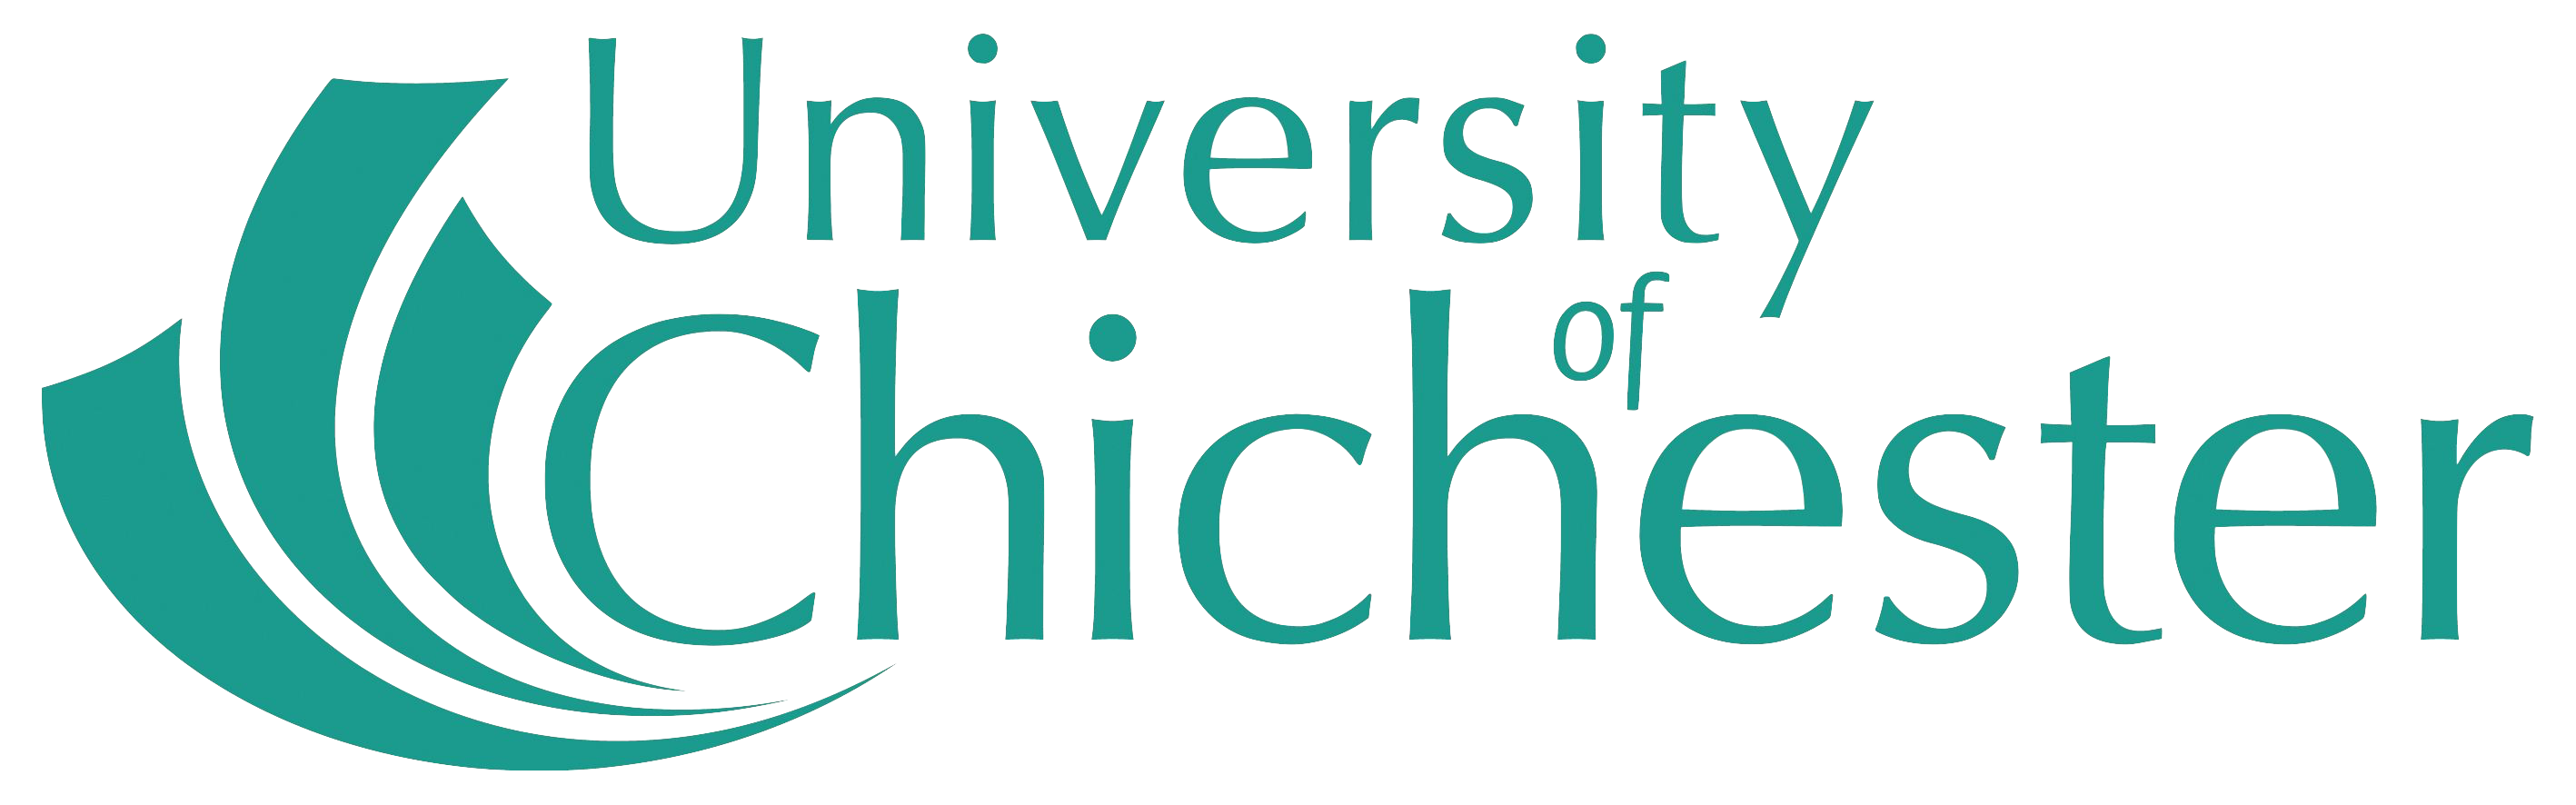 The University of Chichester（UC）